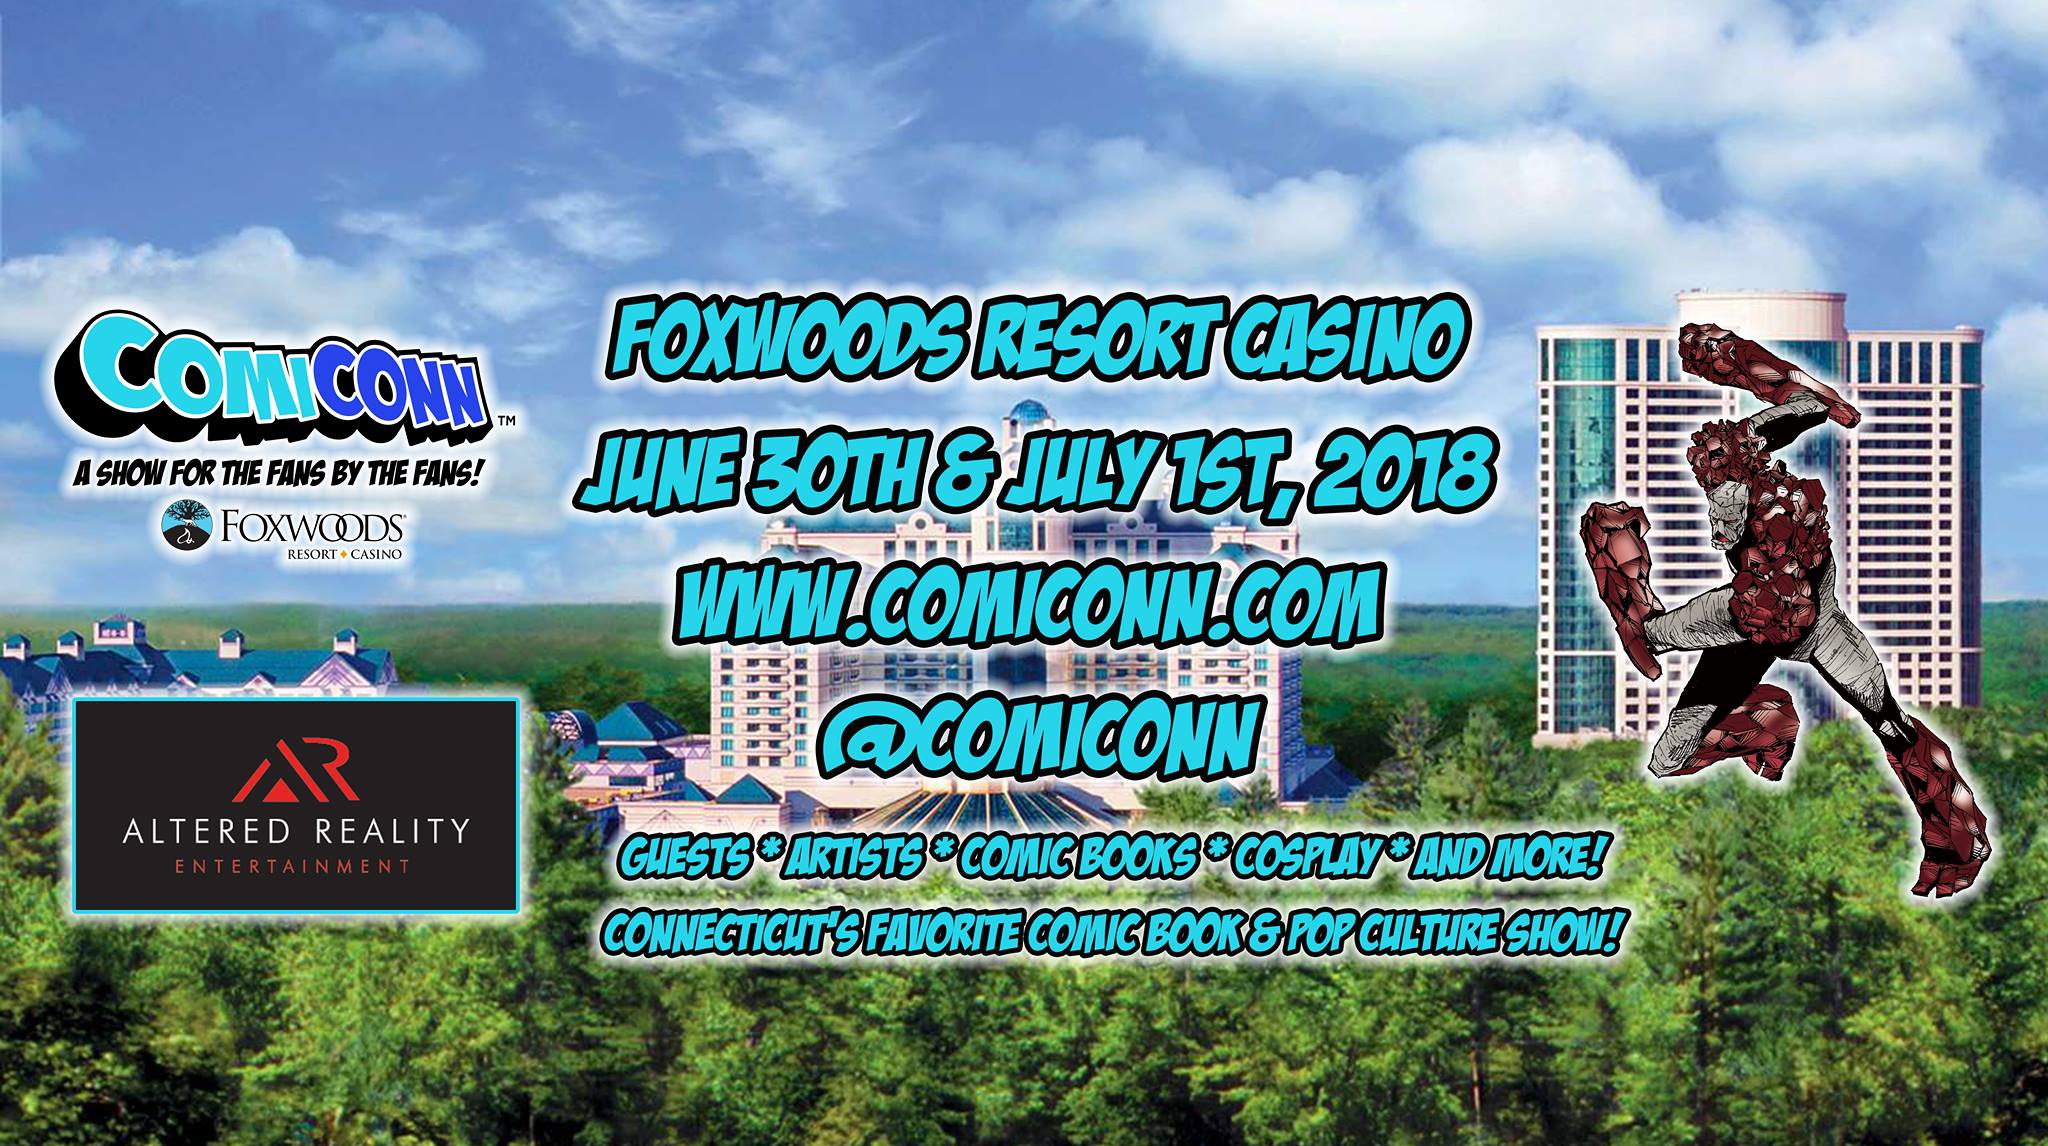 Attention New England fans: ComiCONN comes to Foxwoods Resort Casino June 30 & July 1